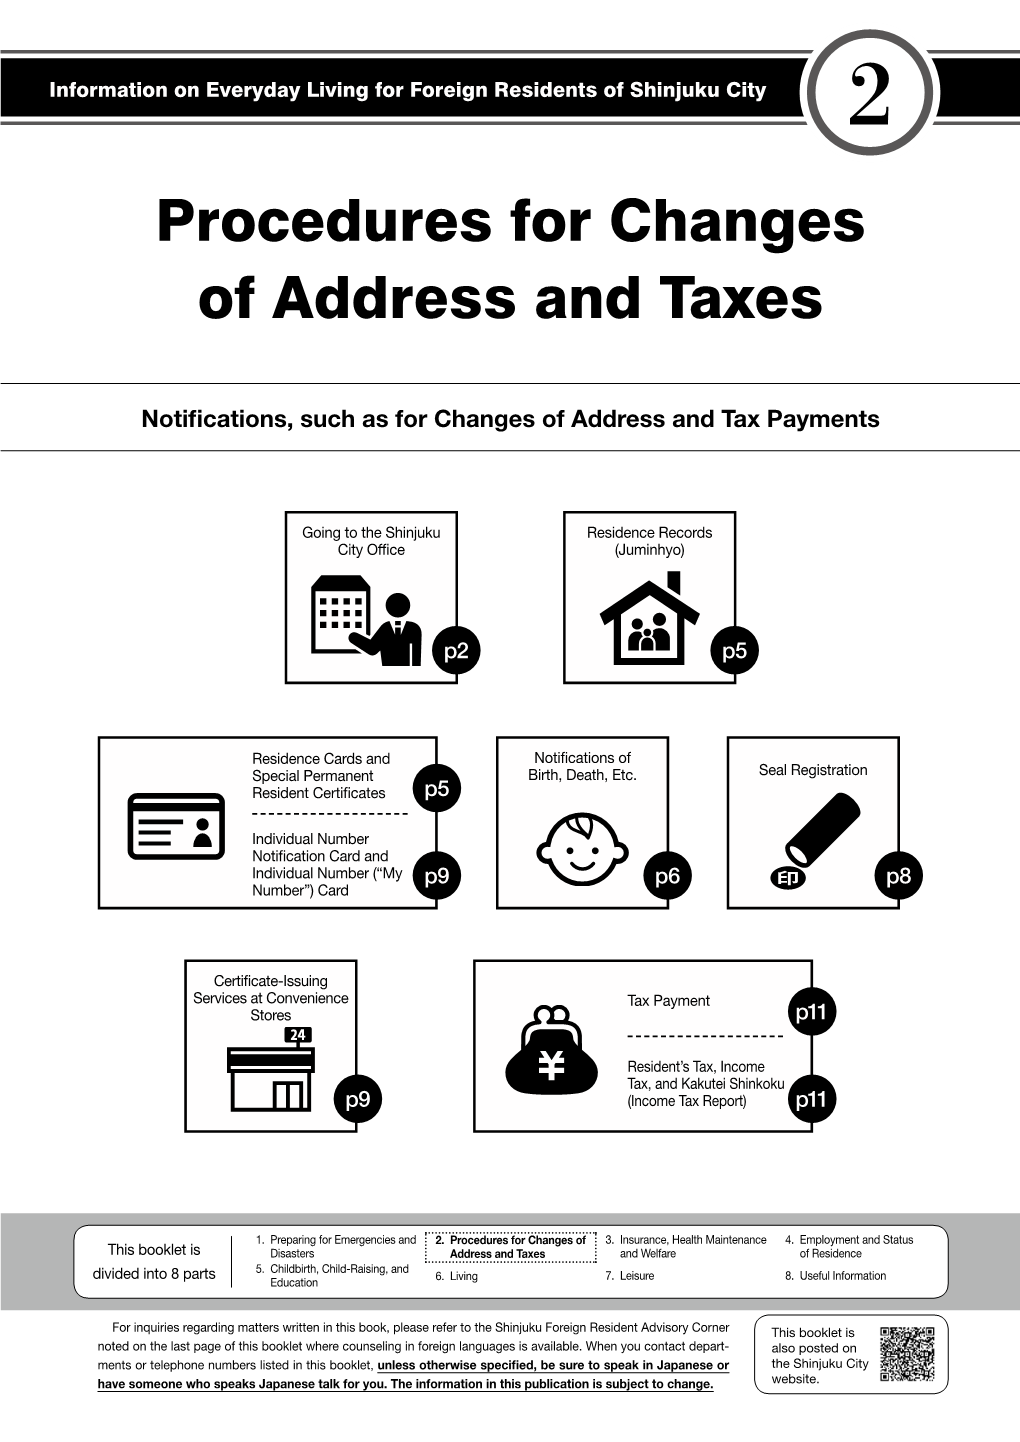 Procedures for Changes of Address and Taxes